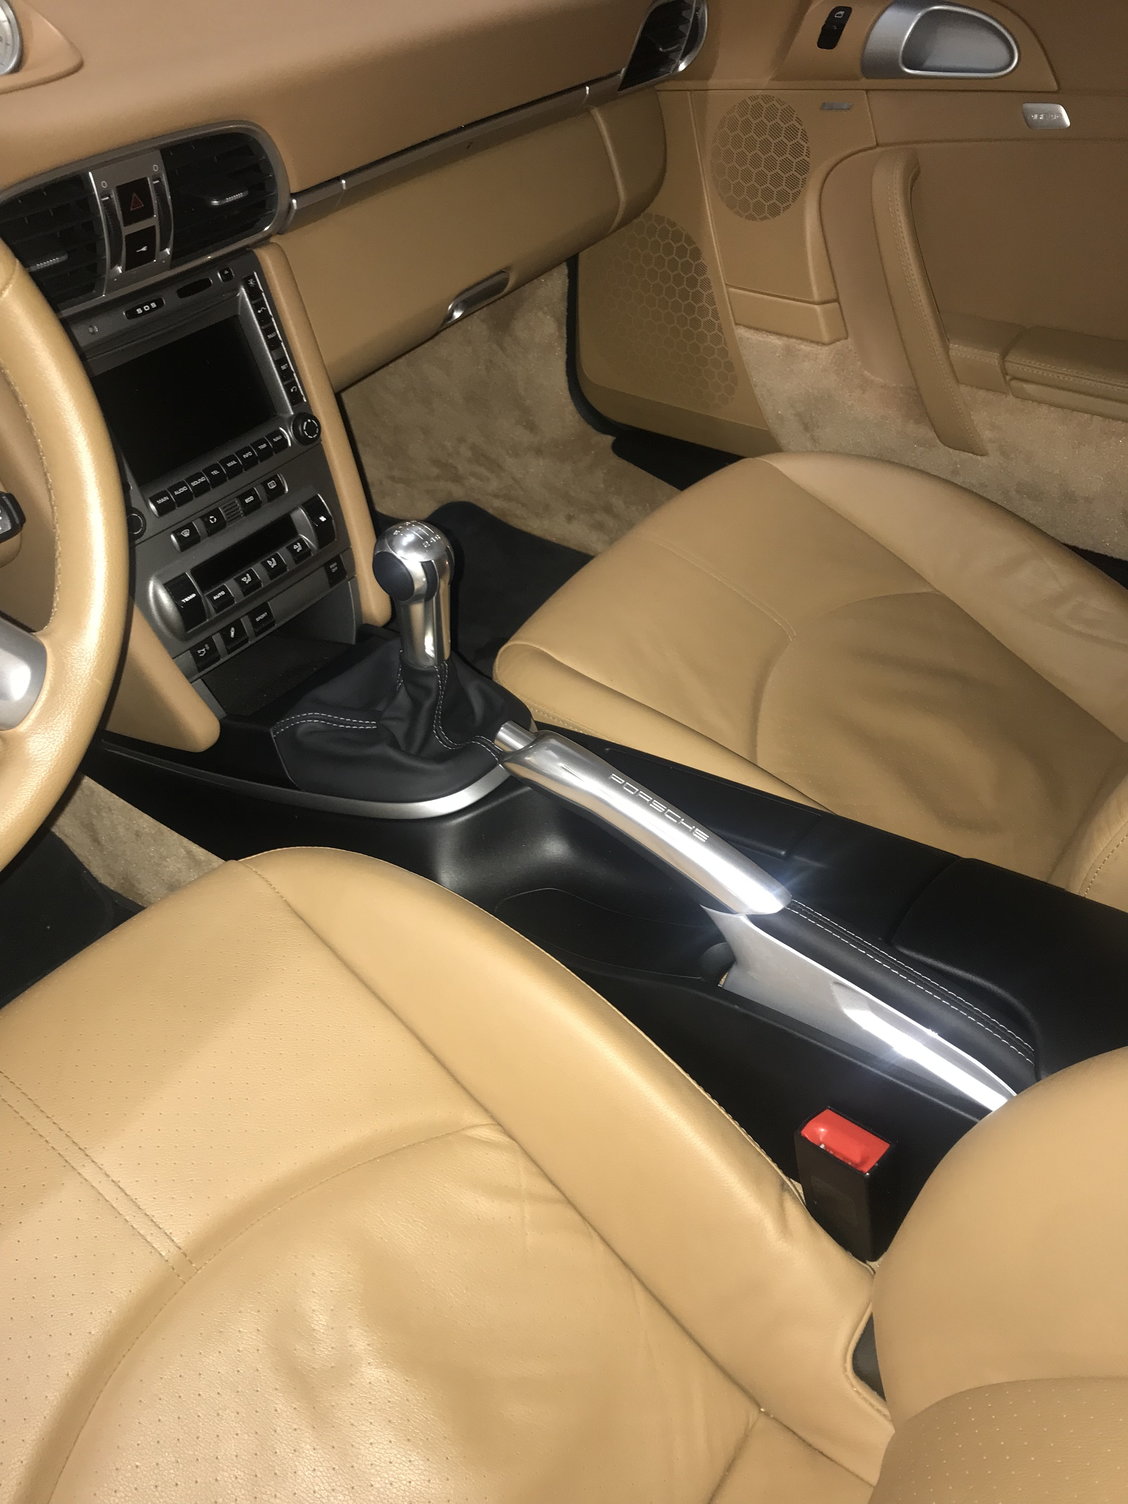 Looking for pics of Sand Beige interior mixed with black